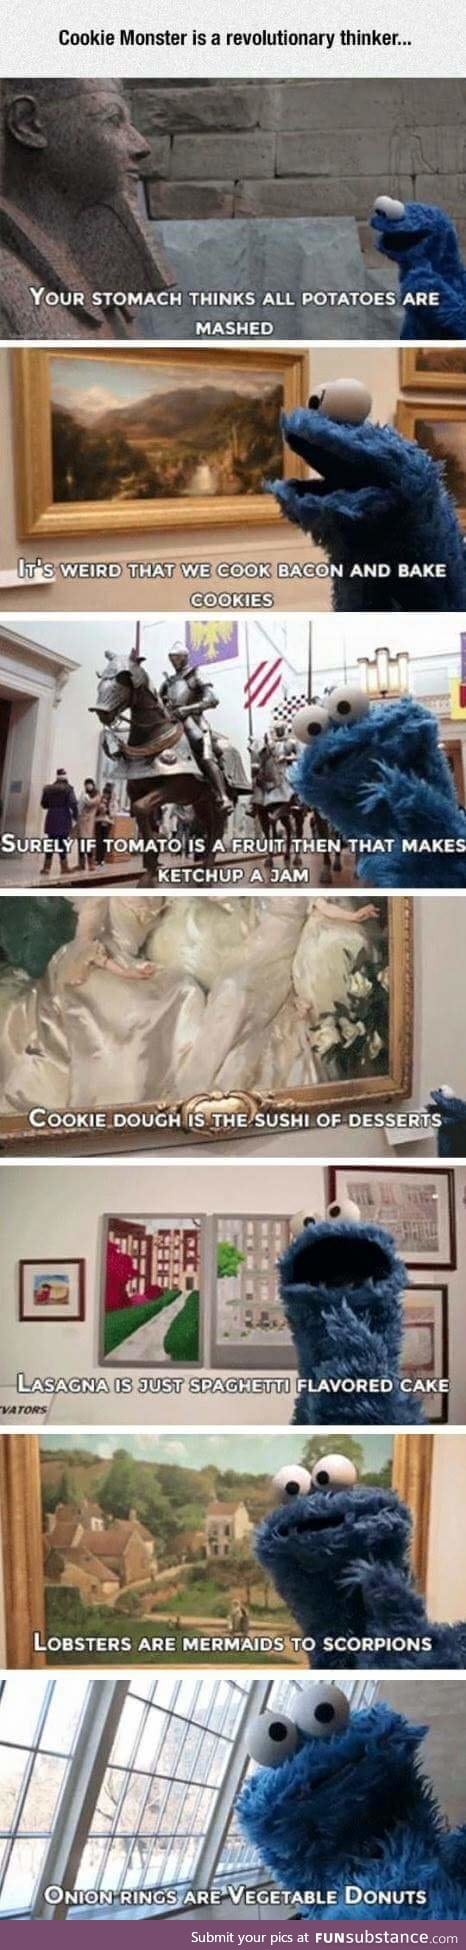 Cookie Monster is bringing culture and philosophy into your house